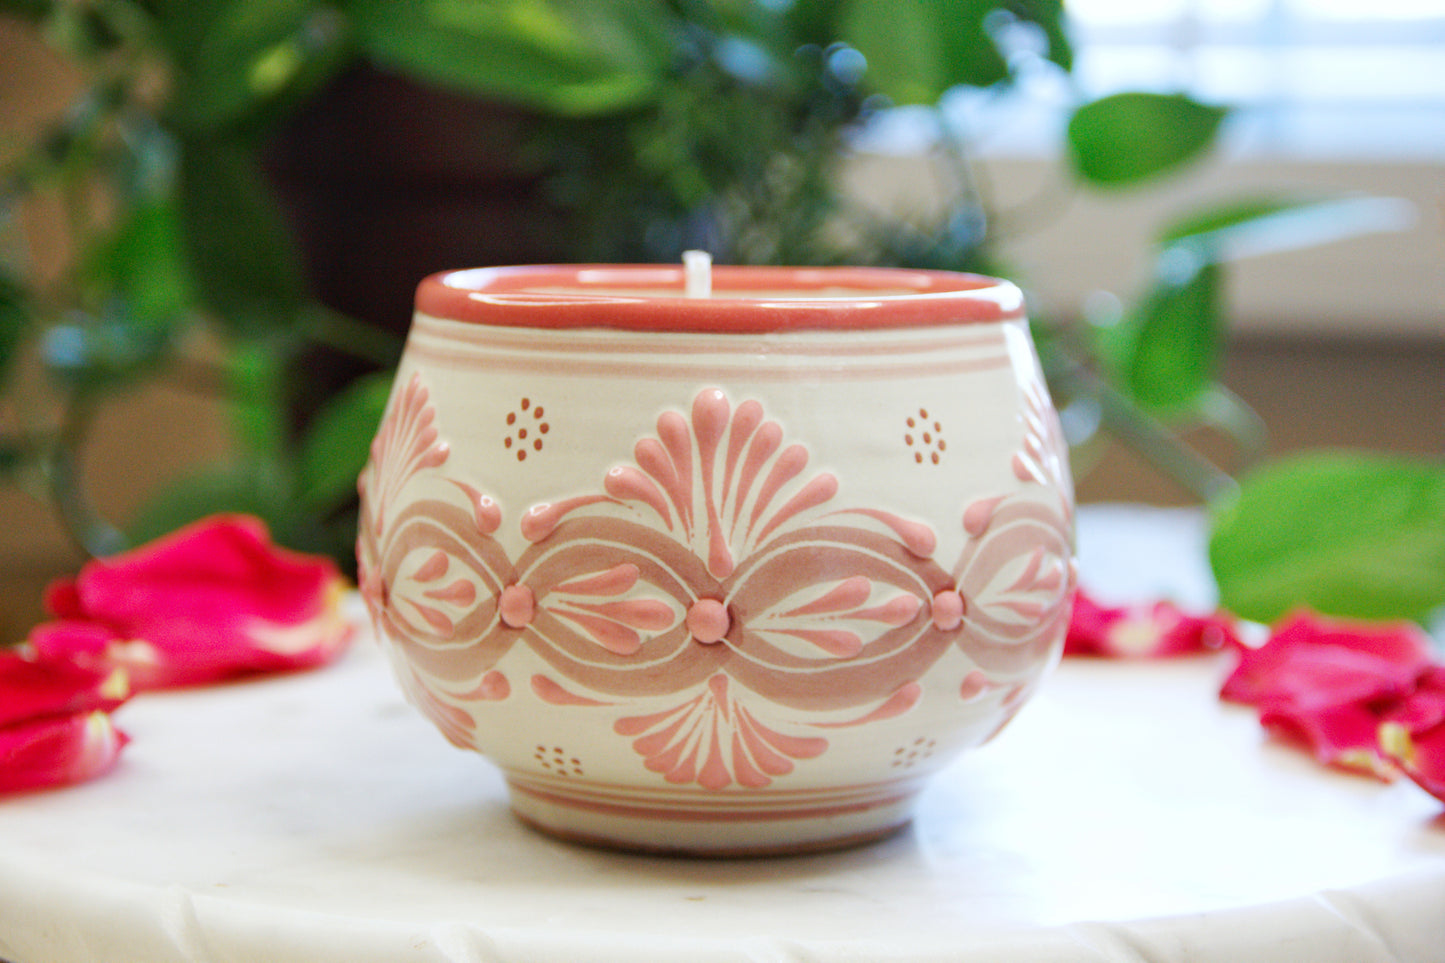 side view of an Artisanal candle in a beautiful light pink and biege handmade design talavera cup with a handle. Handcrafted by Artisan in Puebla, Mexico. 100% All Natural Soy Candle. Reuse the talavera as home decor or storage.